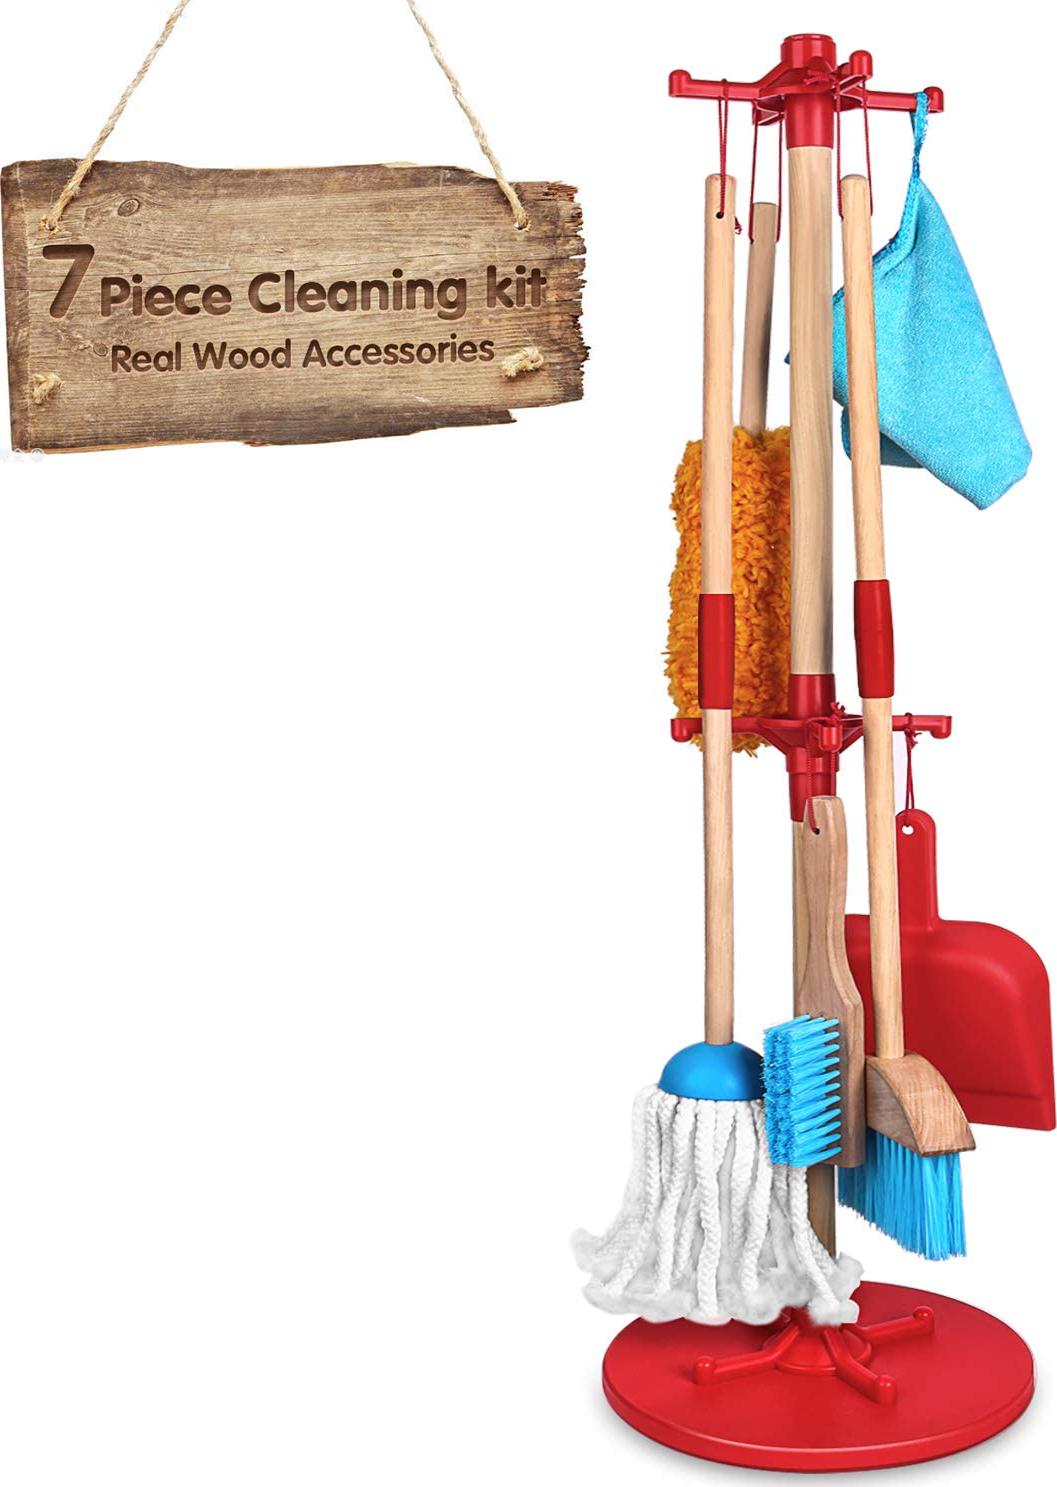 AOKESI, Kids Cleaning Set 7 Piece - Wooden Detachable Toy Cleaning Set Includes Kid-Sized with Housekeeping Broom, Mop, Duster, Dustpan, Brush, Rag, and Organizing Stand for Toy Kitchen Toddler Cleaning Set